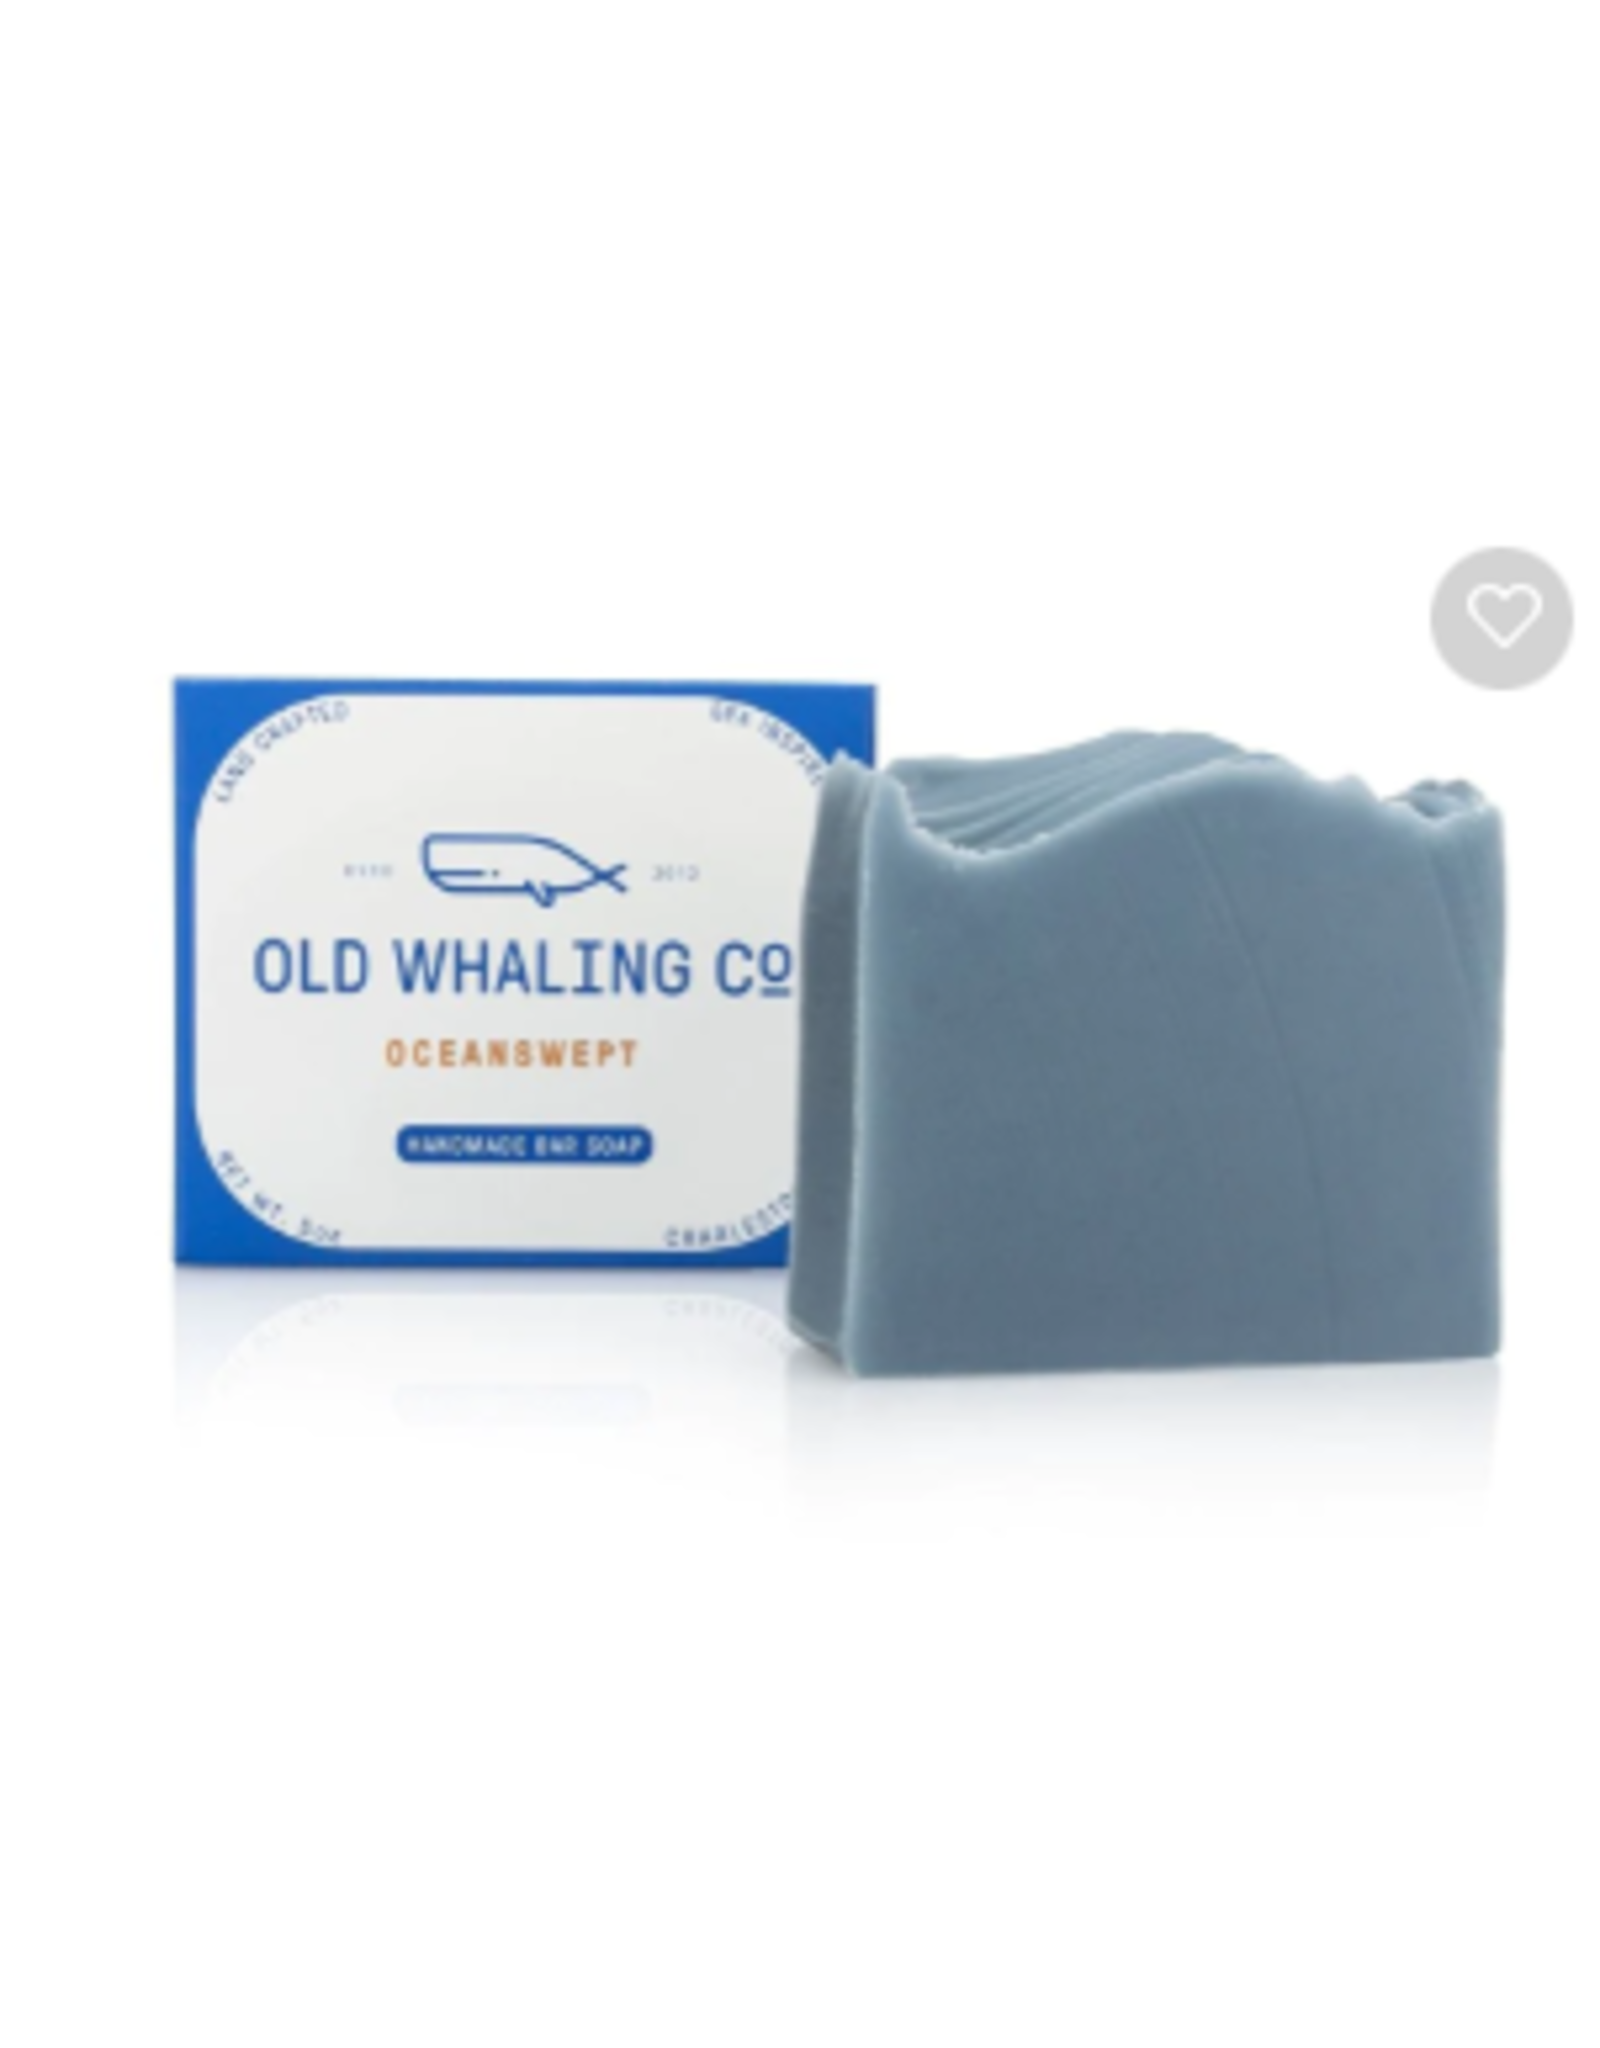 Old Whaling Co. Oceanswept Bar Soap